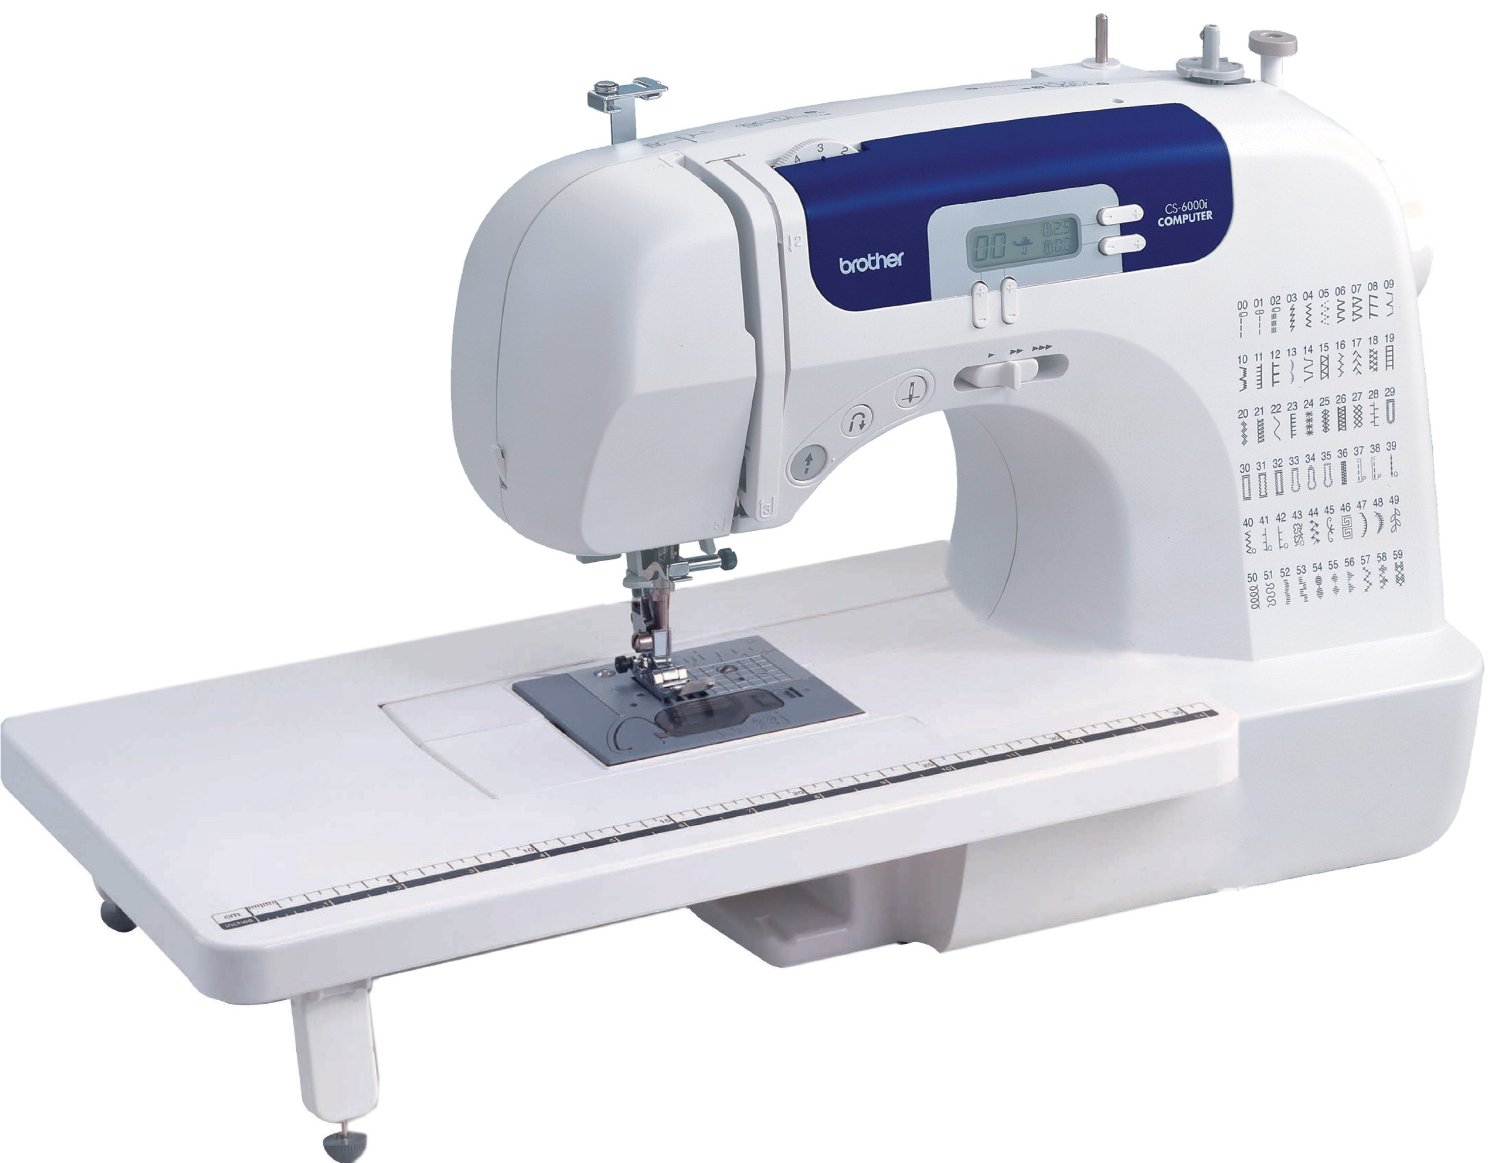 One Sewing Machine - Brother CS6000i review